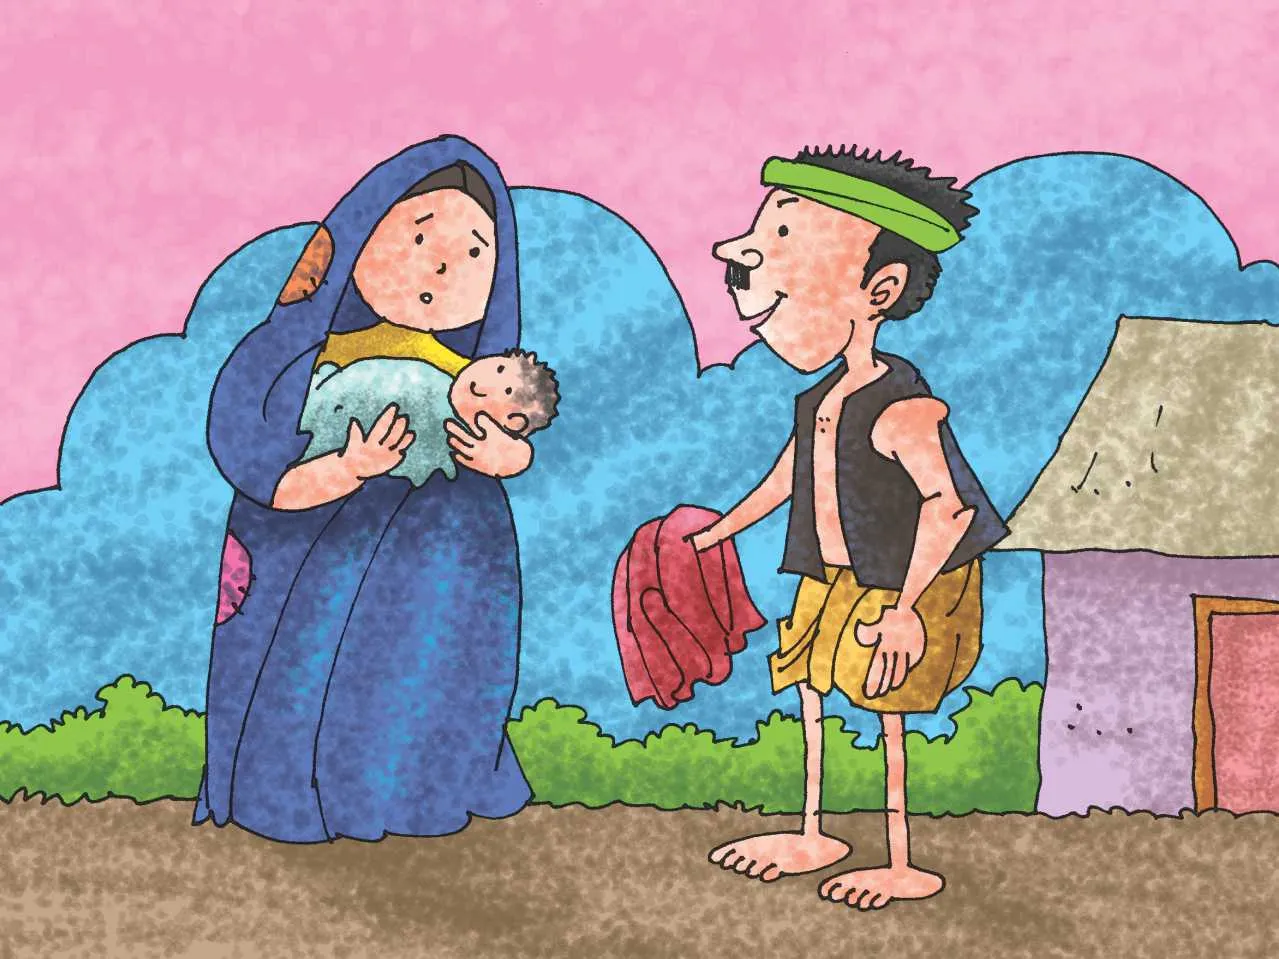 Man And women with a baby cartoon image